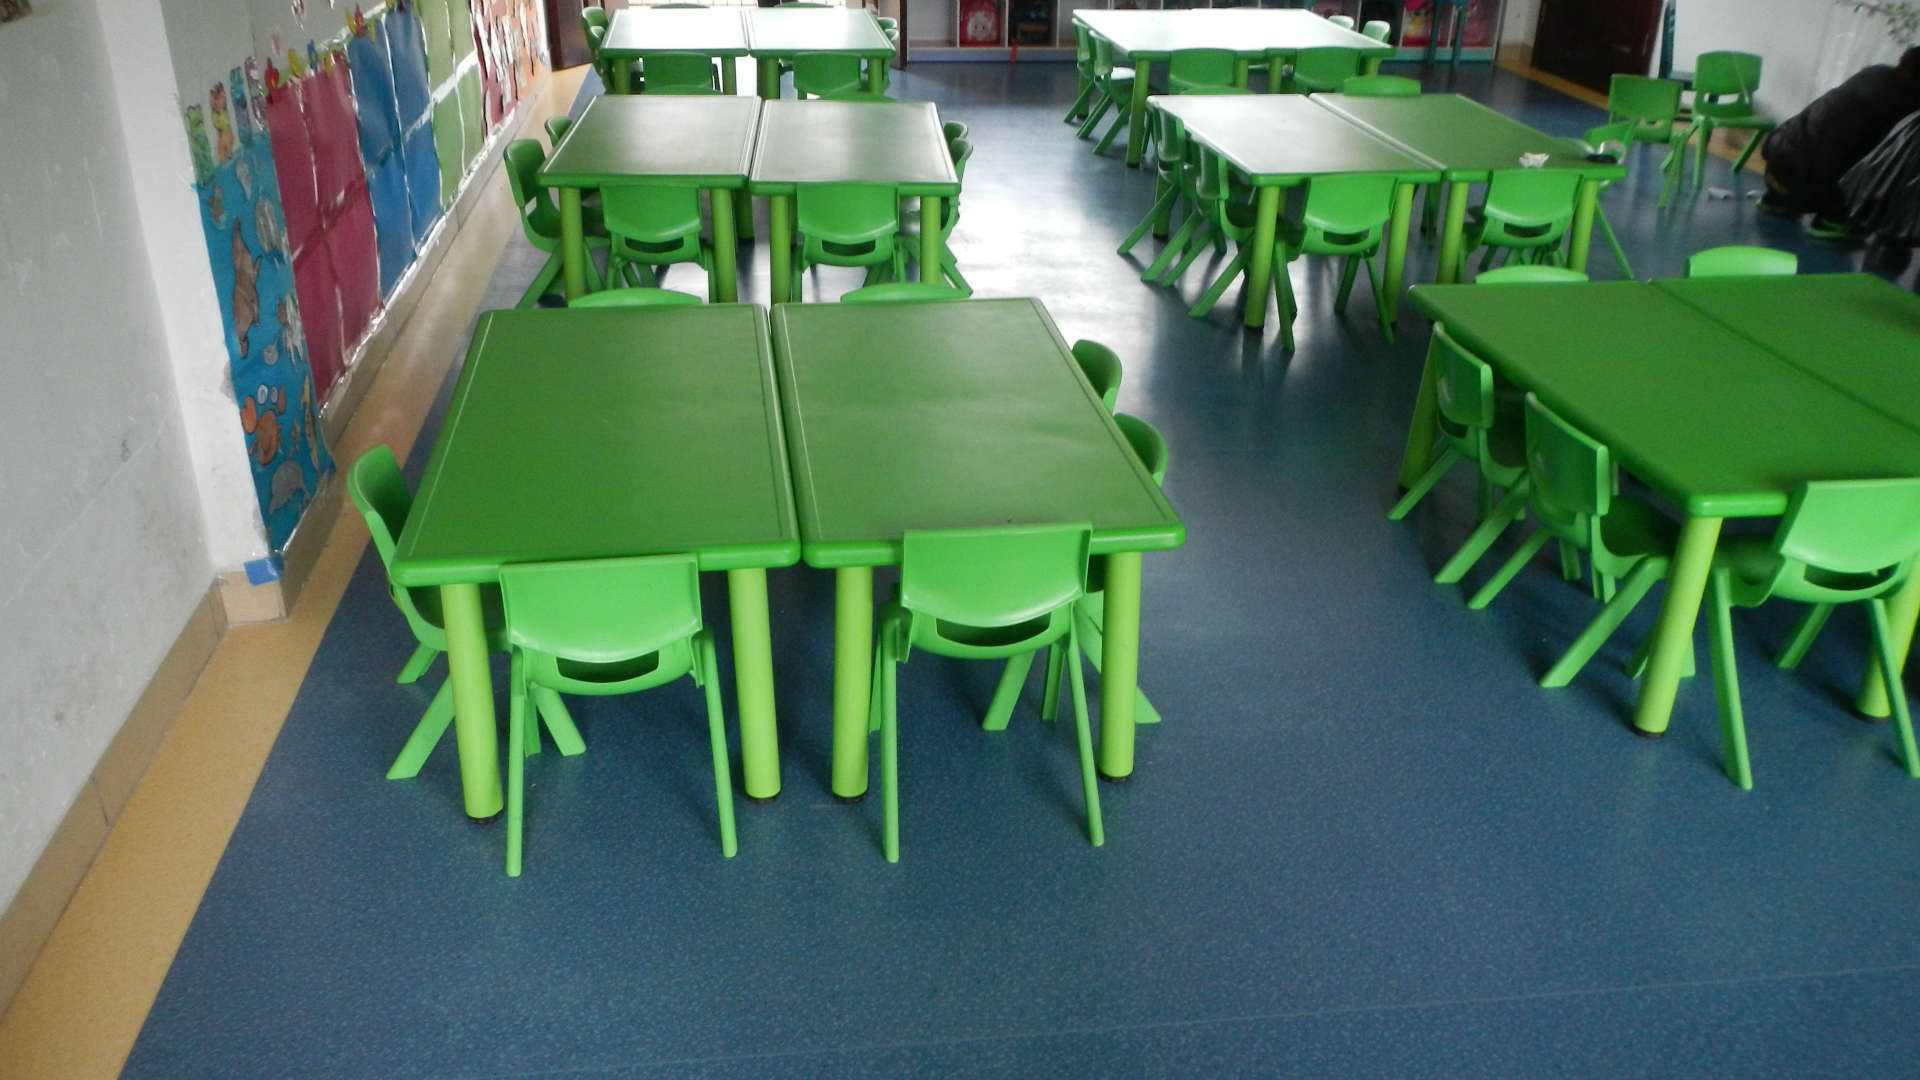 Wolflor flooring for Education